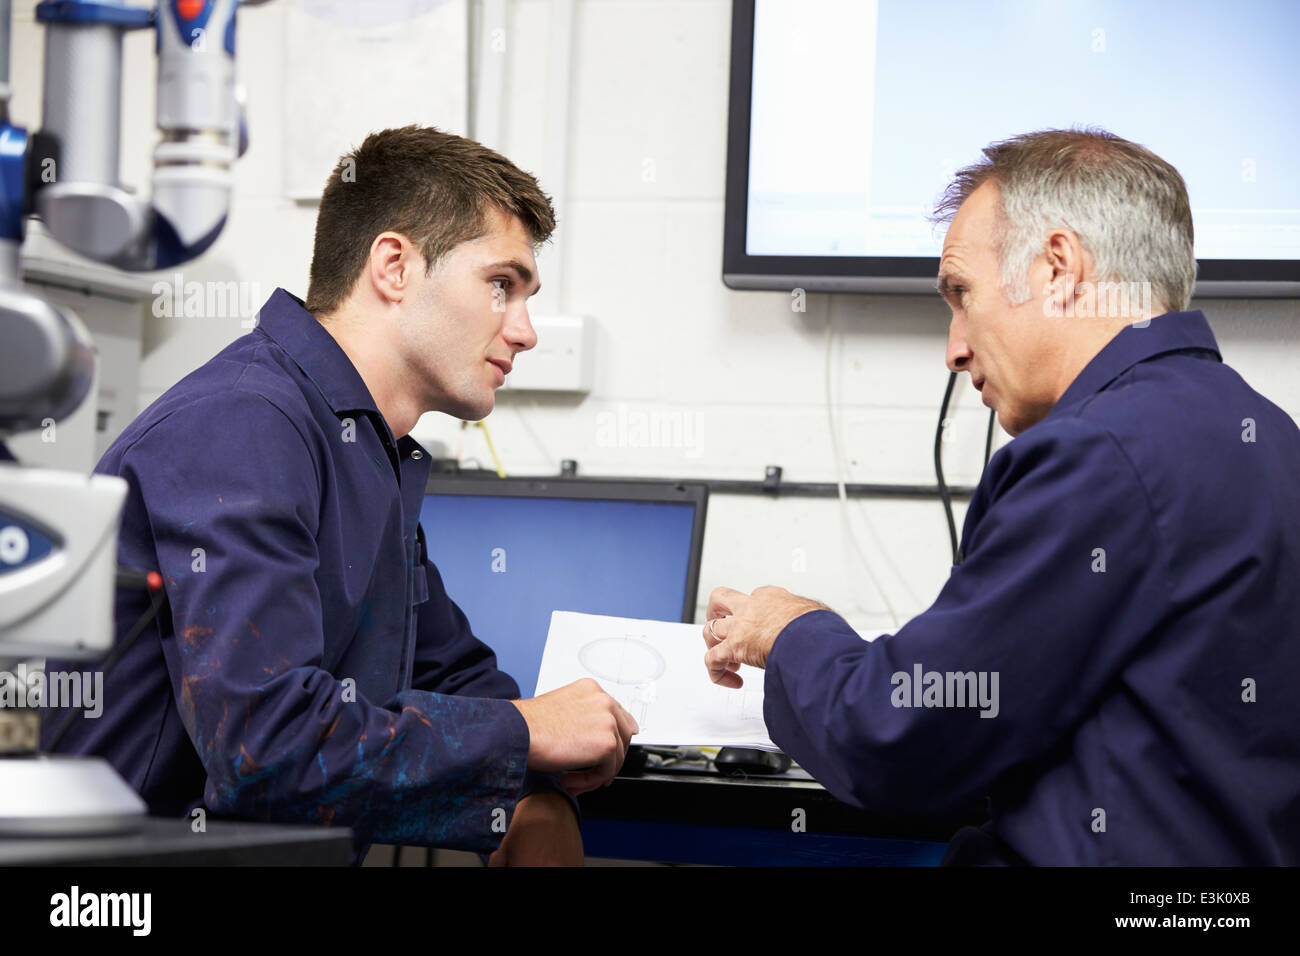 Engineer Showing Trainee Plans With CMM Arm In Foreground Stock Photo